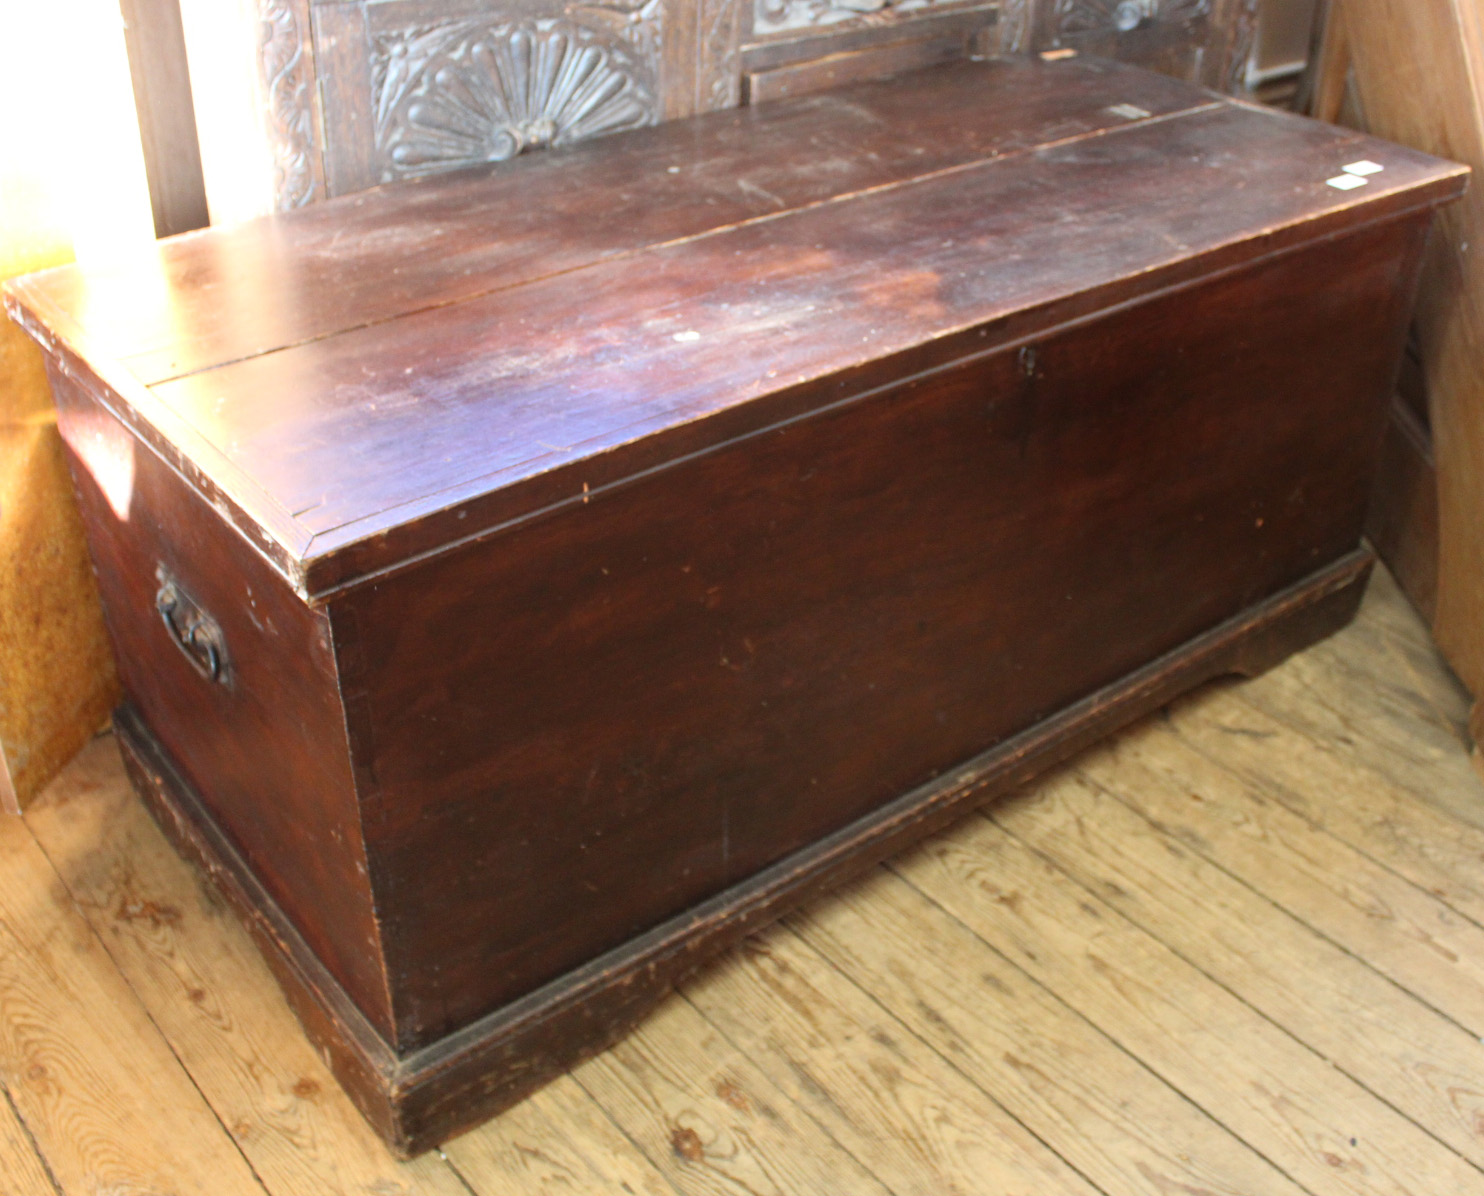 A large Victorian stained pine blanket box